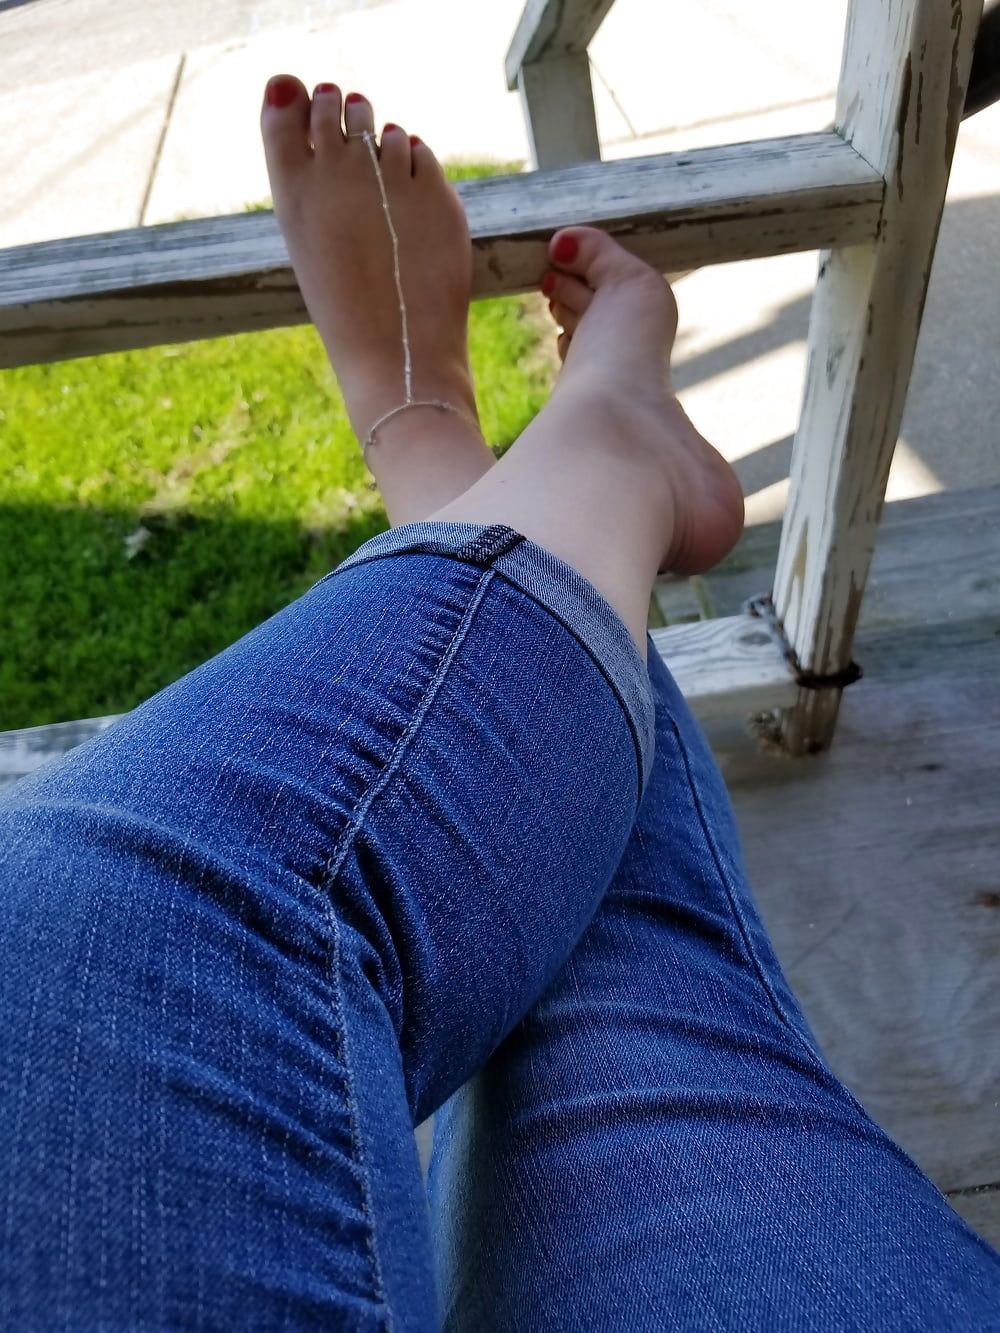 Playtime while chatting with a certain someone.... wife Milf #16